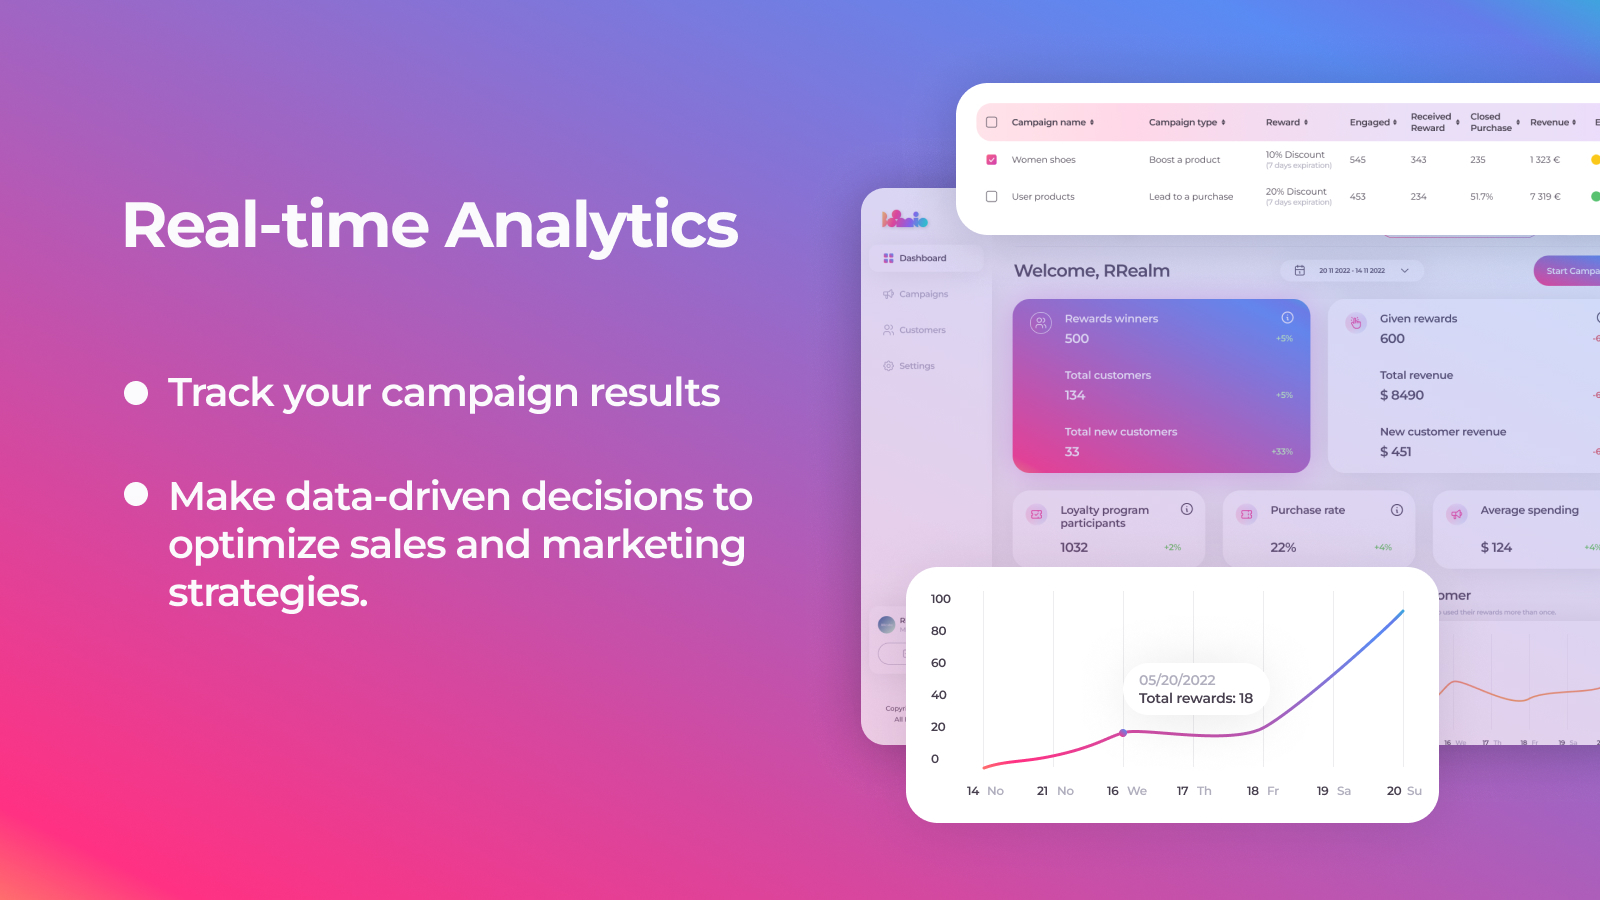 Unlock Insights on the Fly - Our Real-time Analytics Dashboard provides instant access to critical data, empowering you to make informed decisions in the blink of an eye.